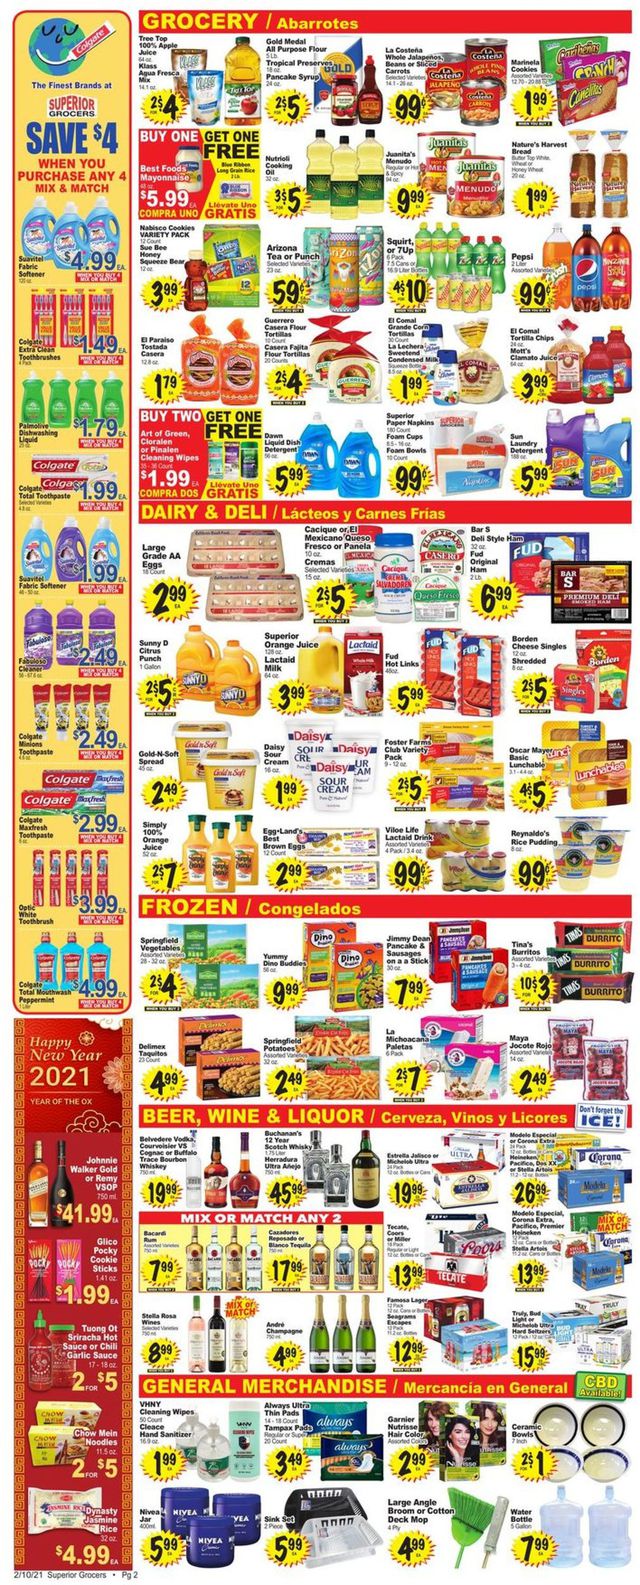 Superior Grocers Ad from 02/10/2021